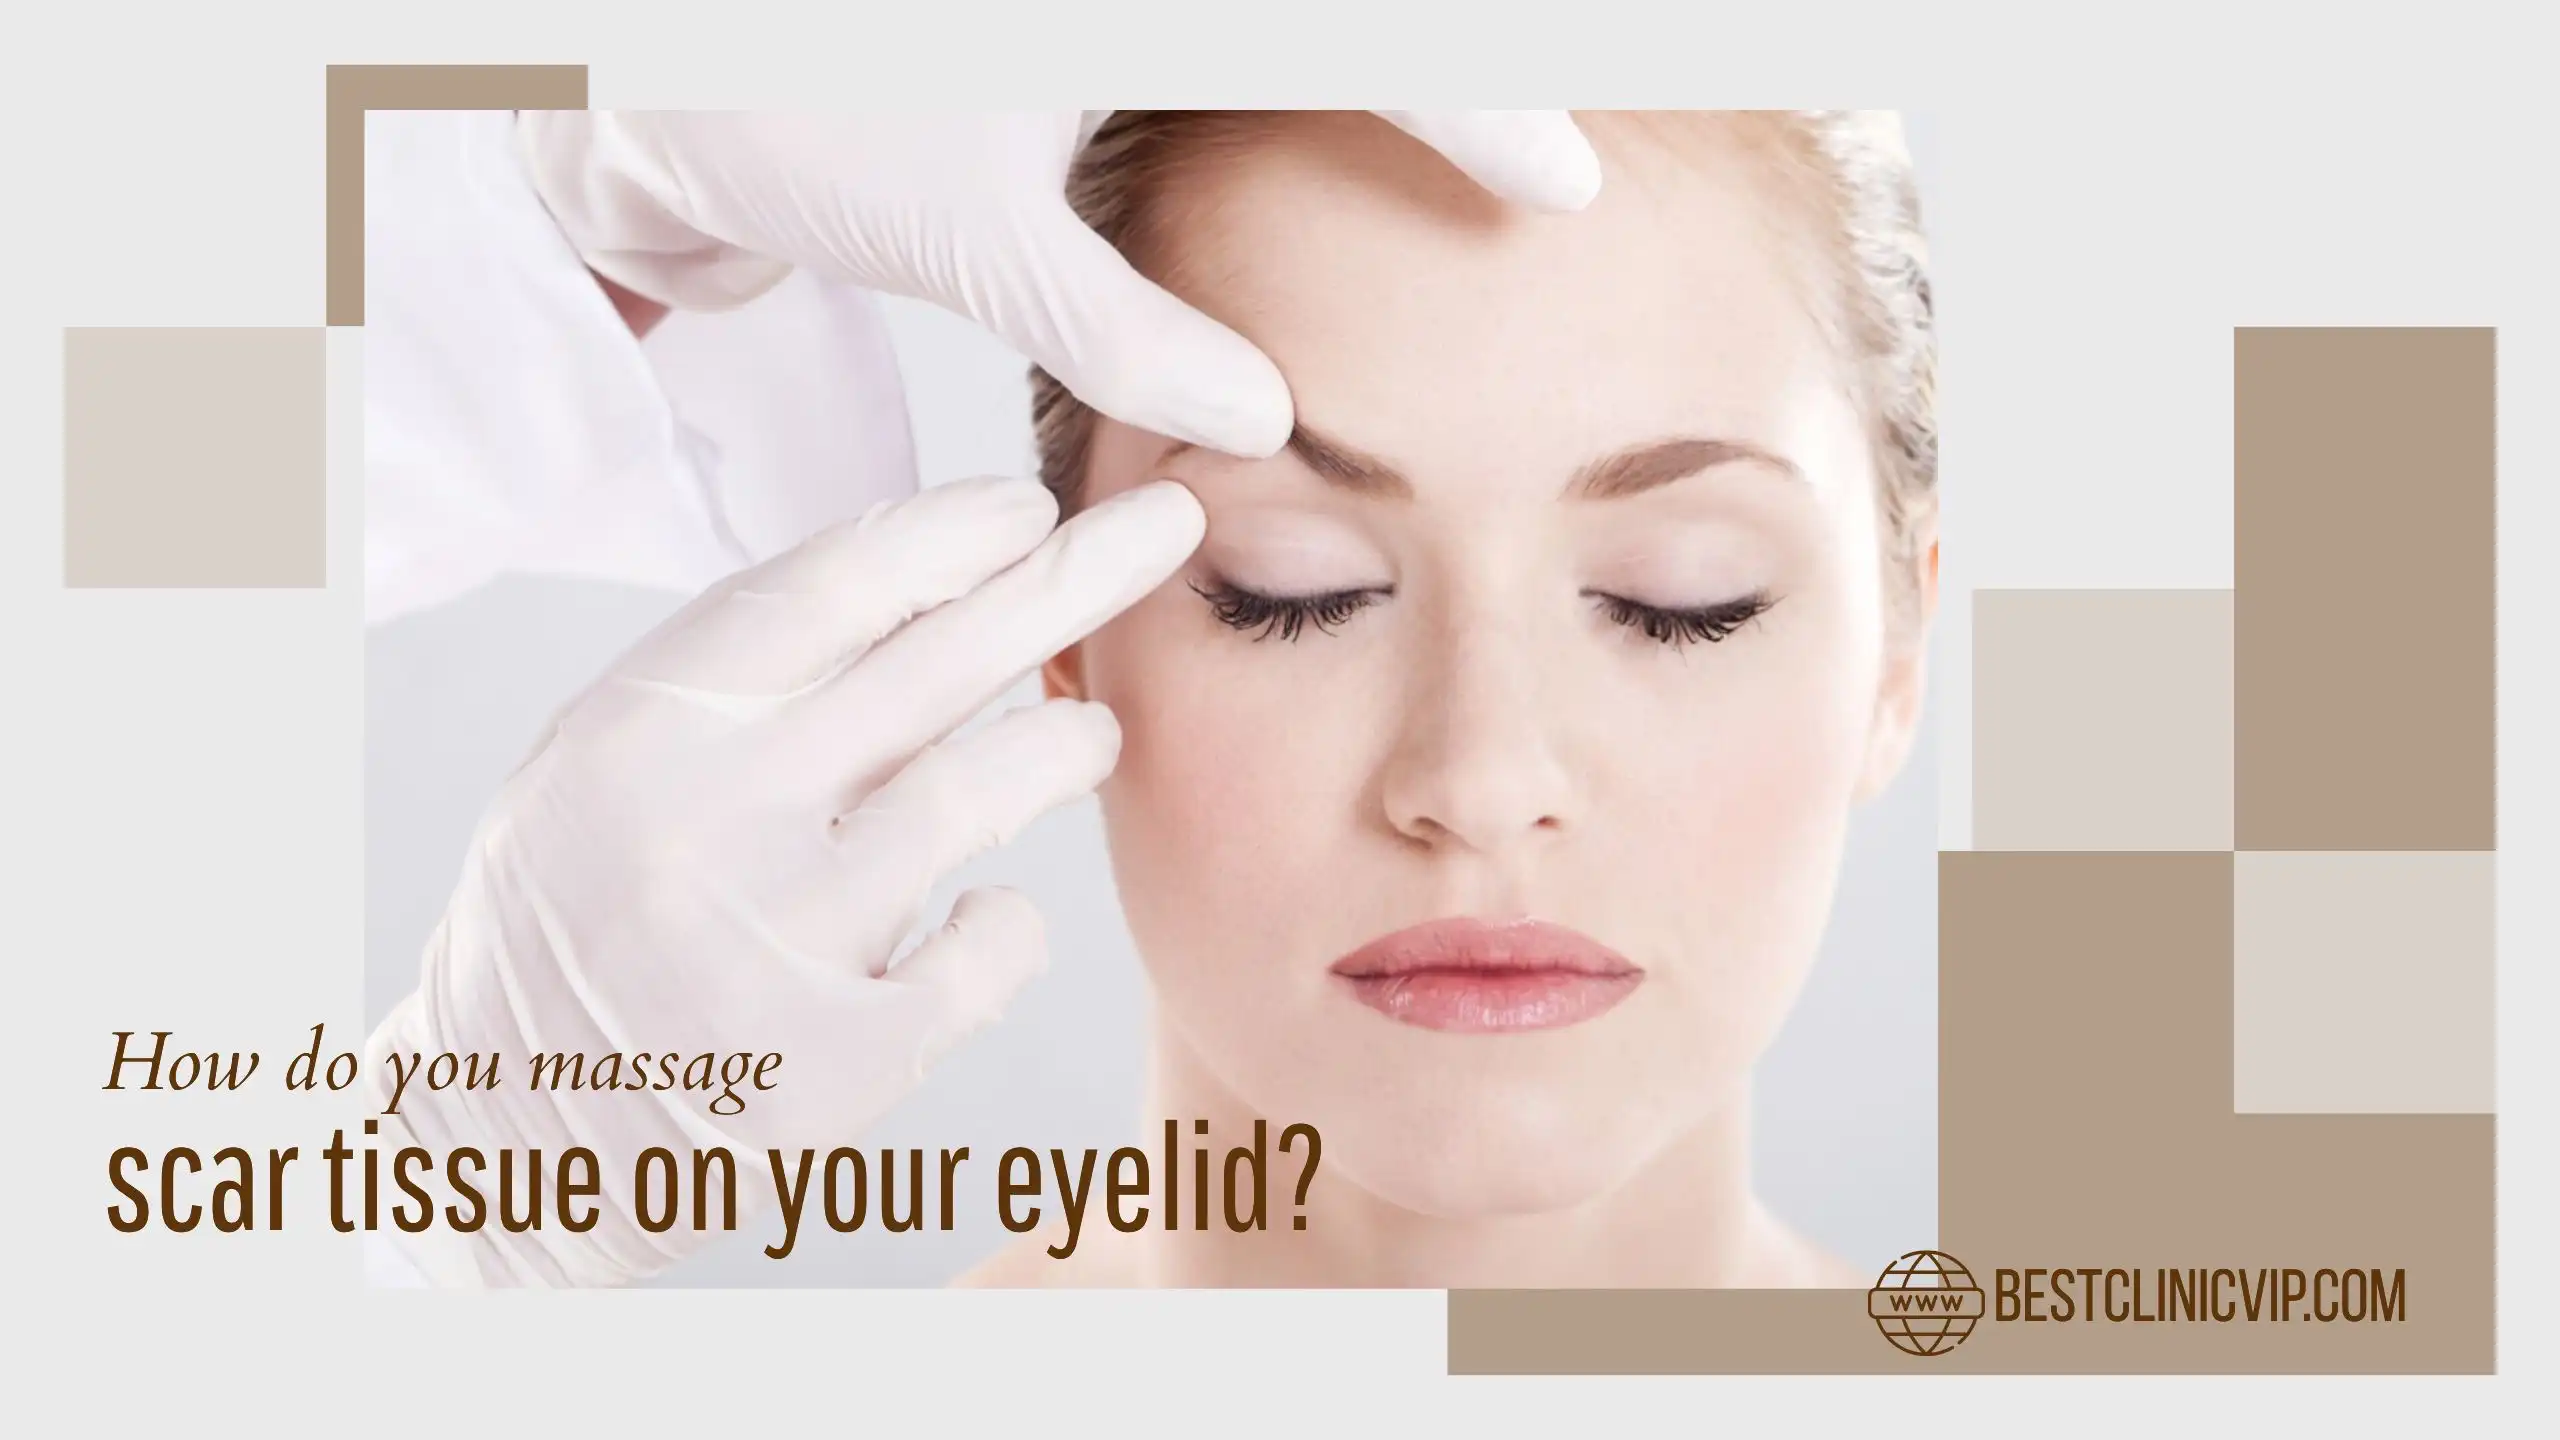 How do you massage scar tissue on your eyelid?